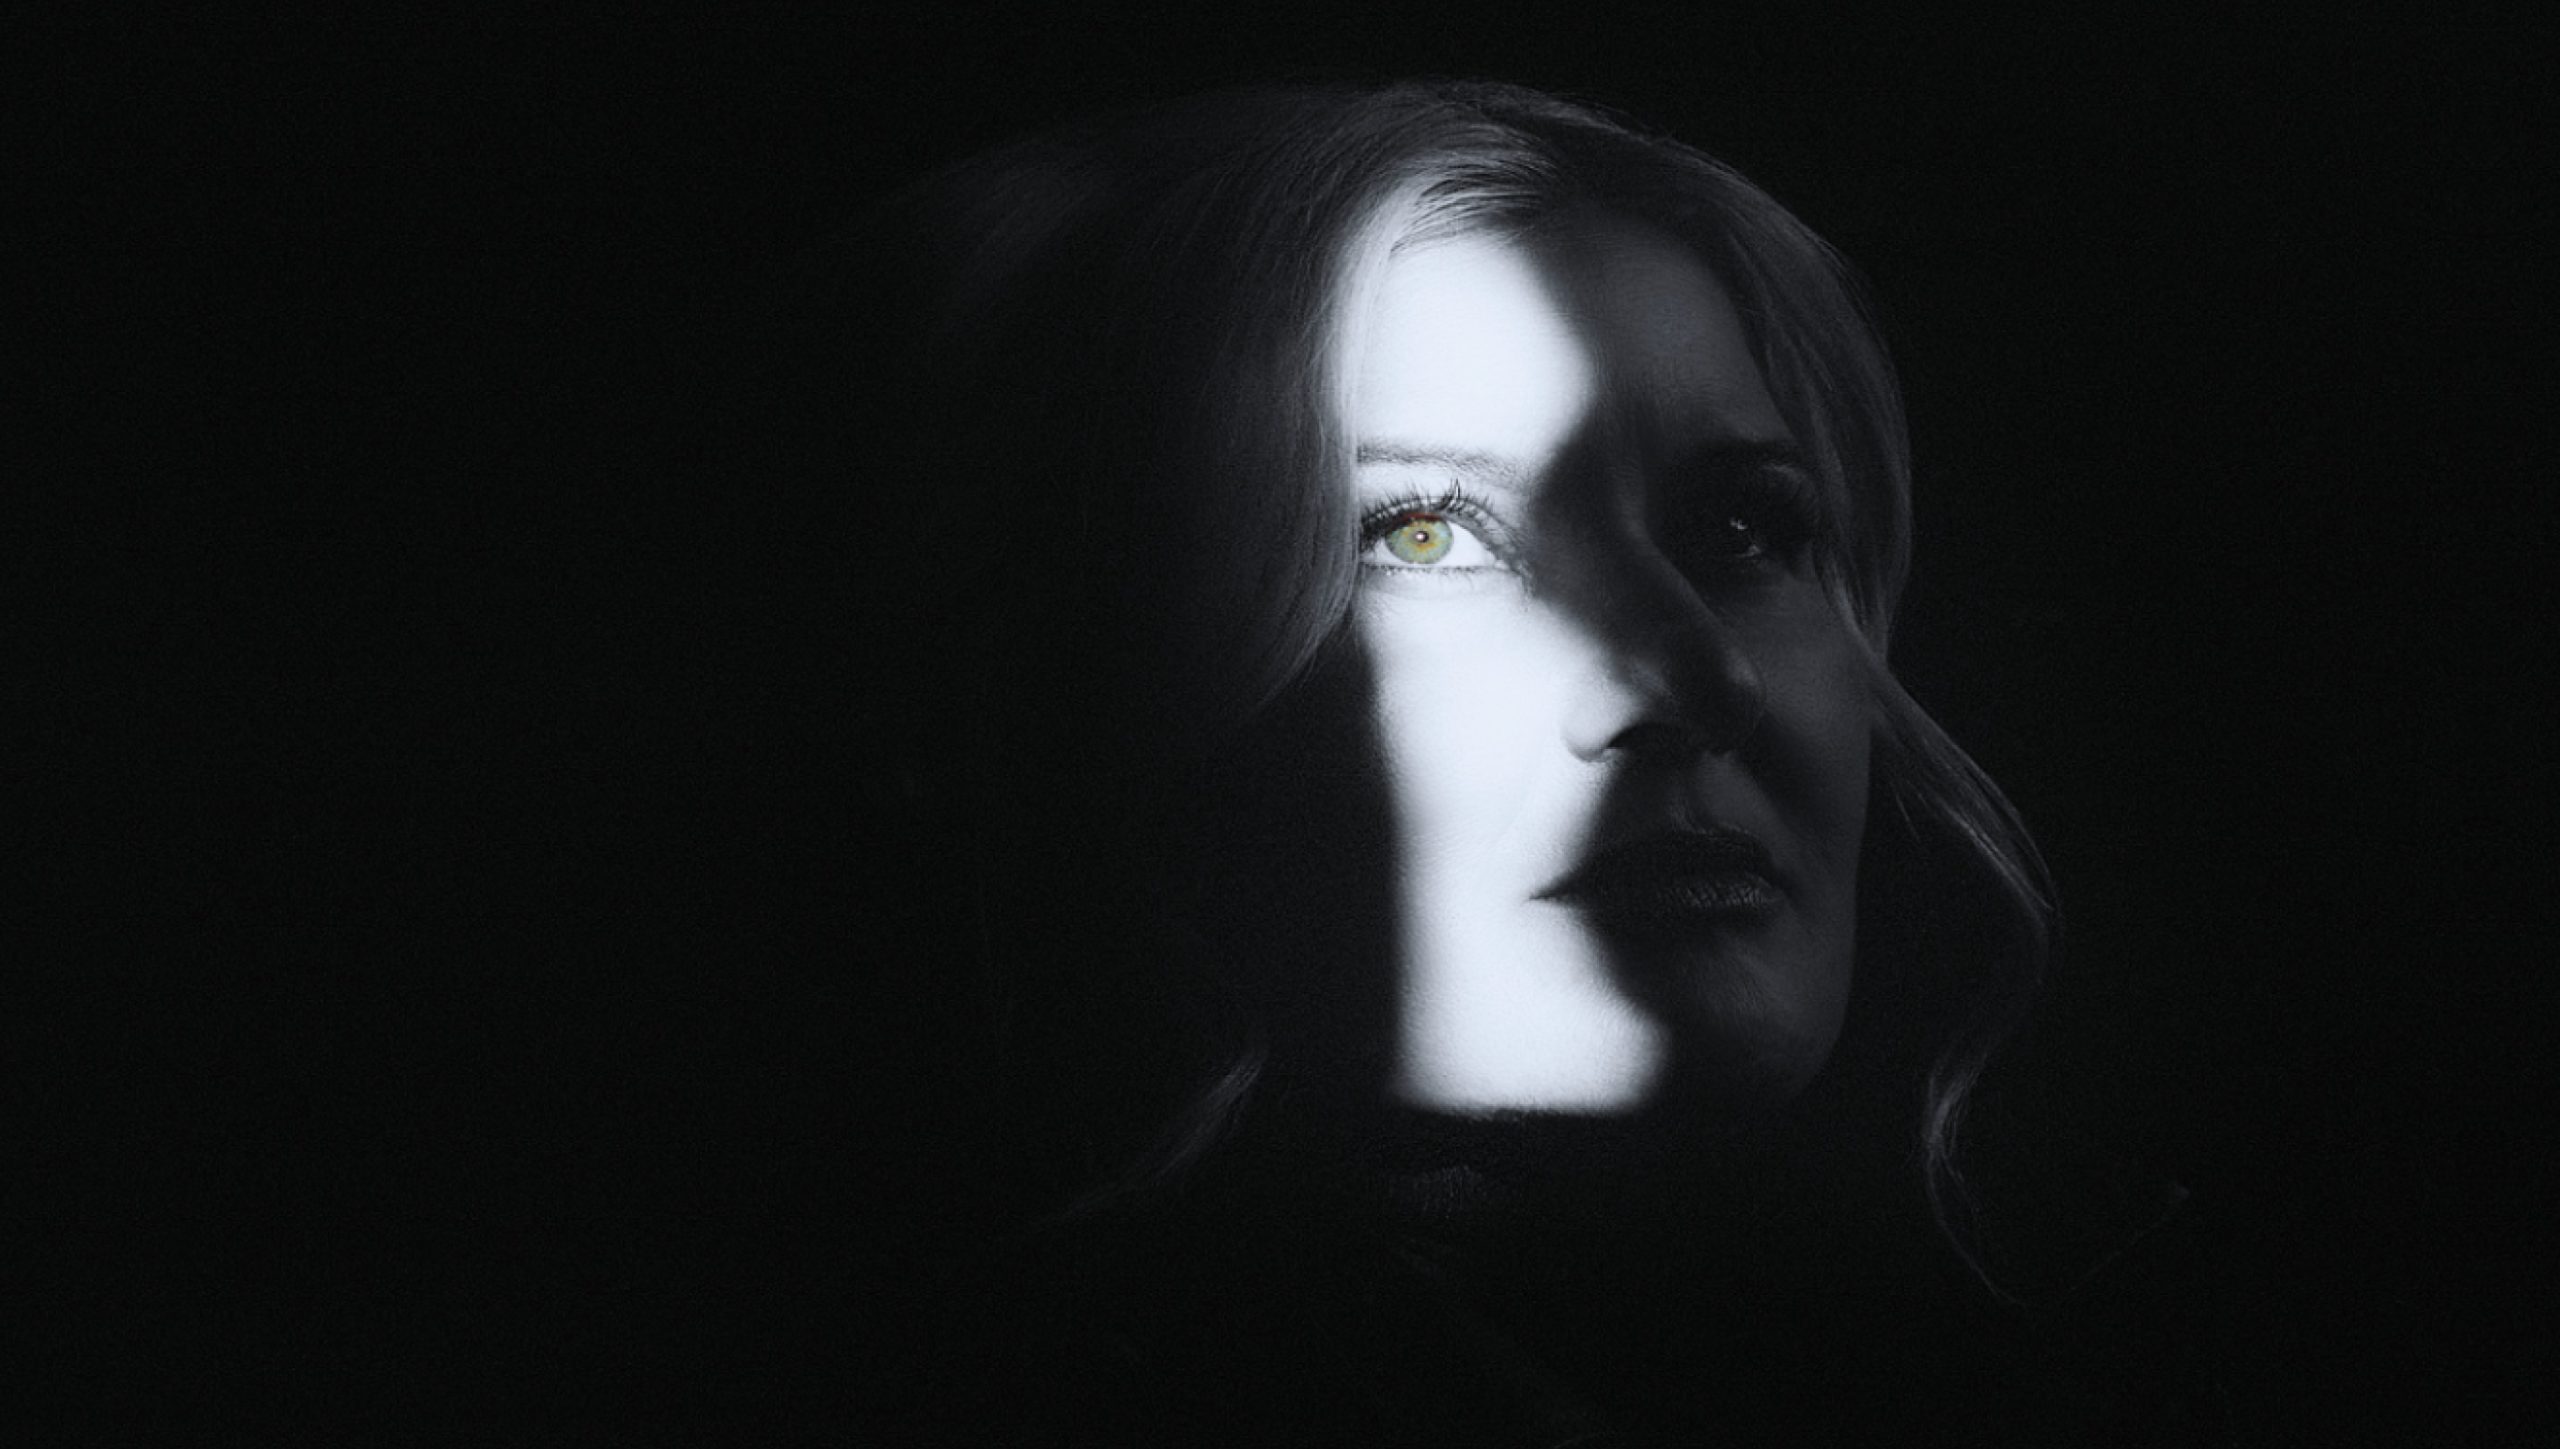 A mysterious portrait of American singer Paula Cole illuminated by a sliver of light, highlighting her intense gaze and delicate facial features amidst the shadows.